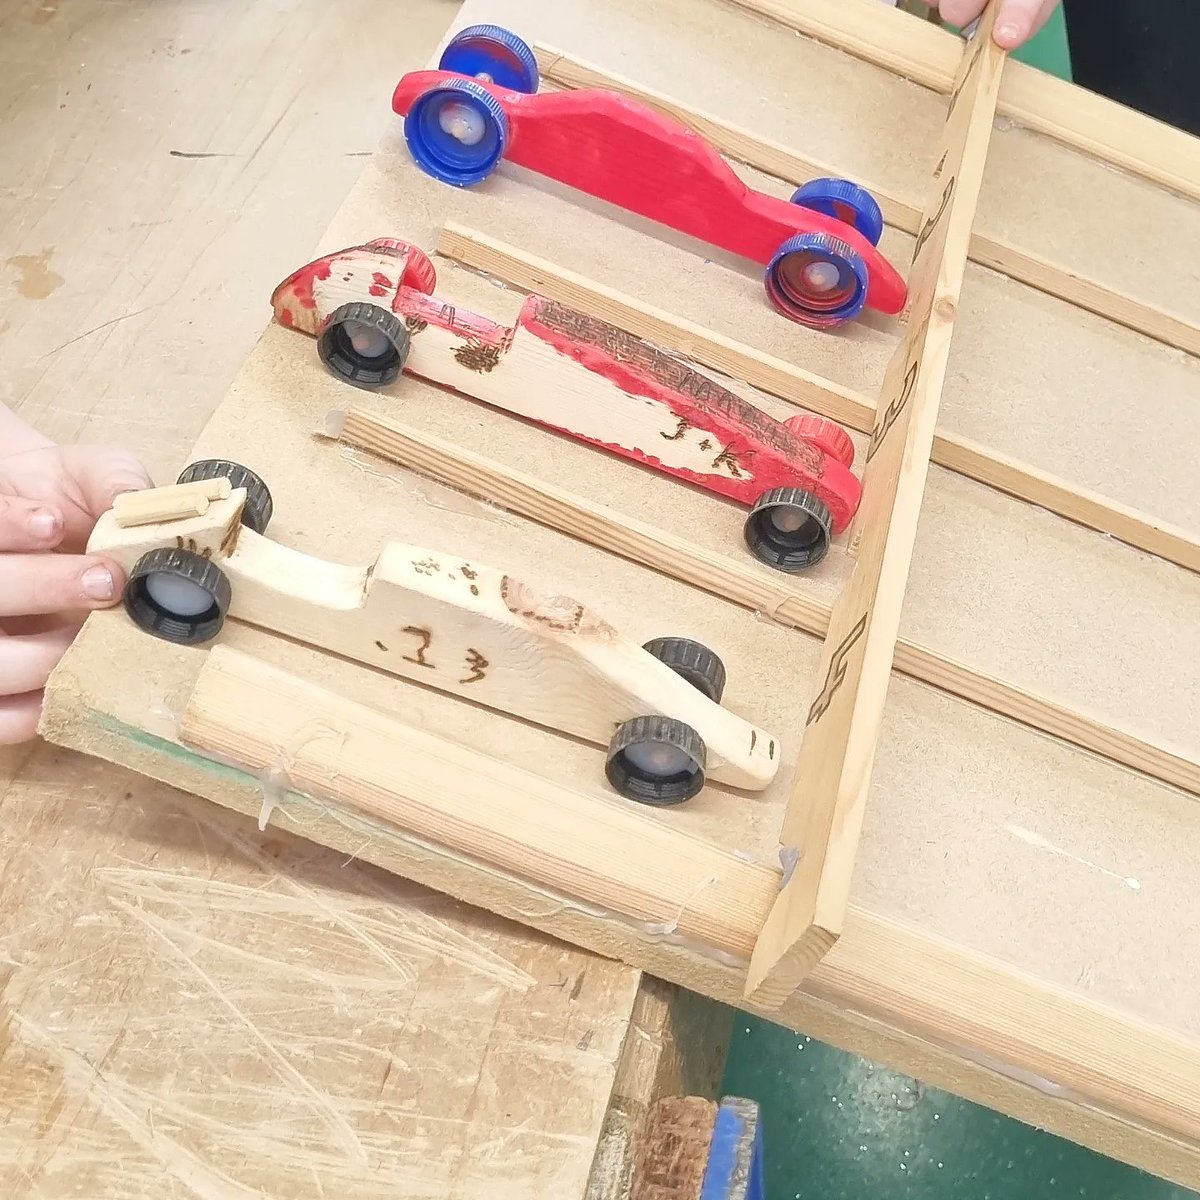 1st year Wood Technology students 🏎 making wooden toy cars

...kids do woodwork too 🌱

#irishcraft #irishdesign #irishwoodworking #irishwoodworker #irishwoodcraft #woodentoys #woodentoy #woodworkforall #woodworking #woodwork #woodworkingskills #design  #inwoodfurnituredesign